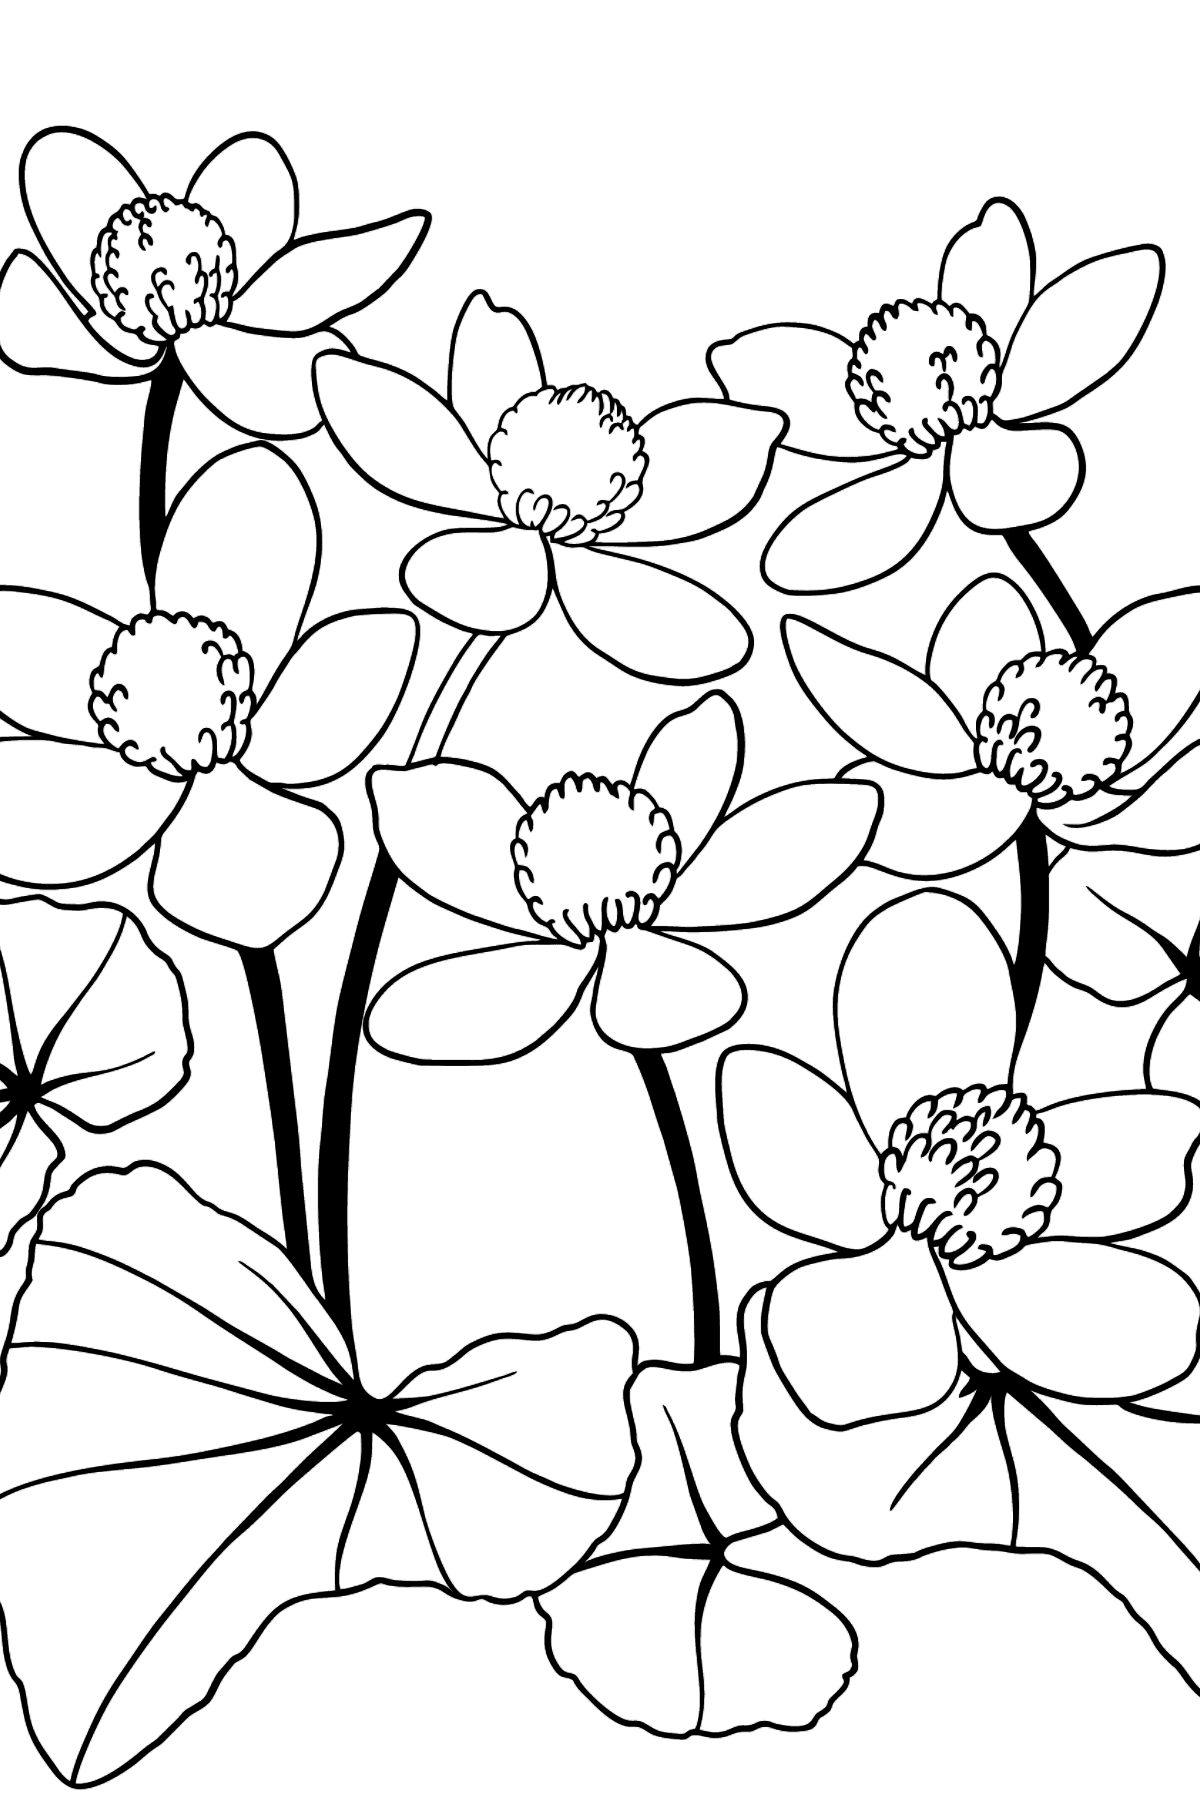 Coloring Page Marsh Marigold - Coloring Pages for Kids